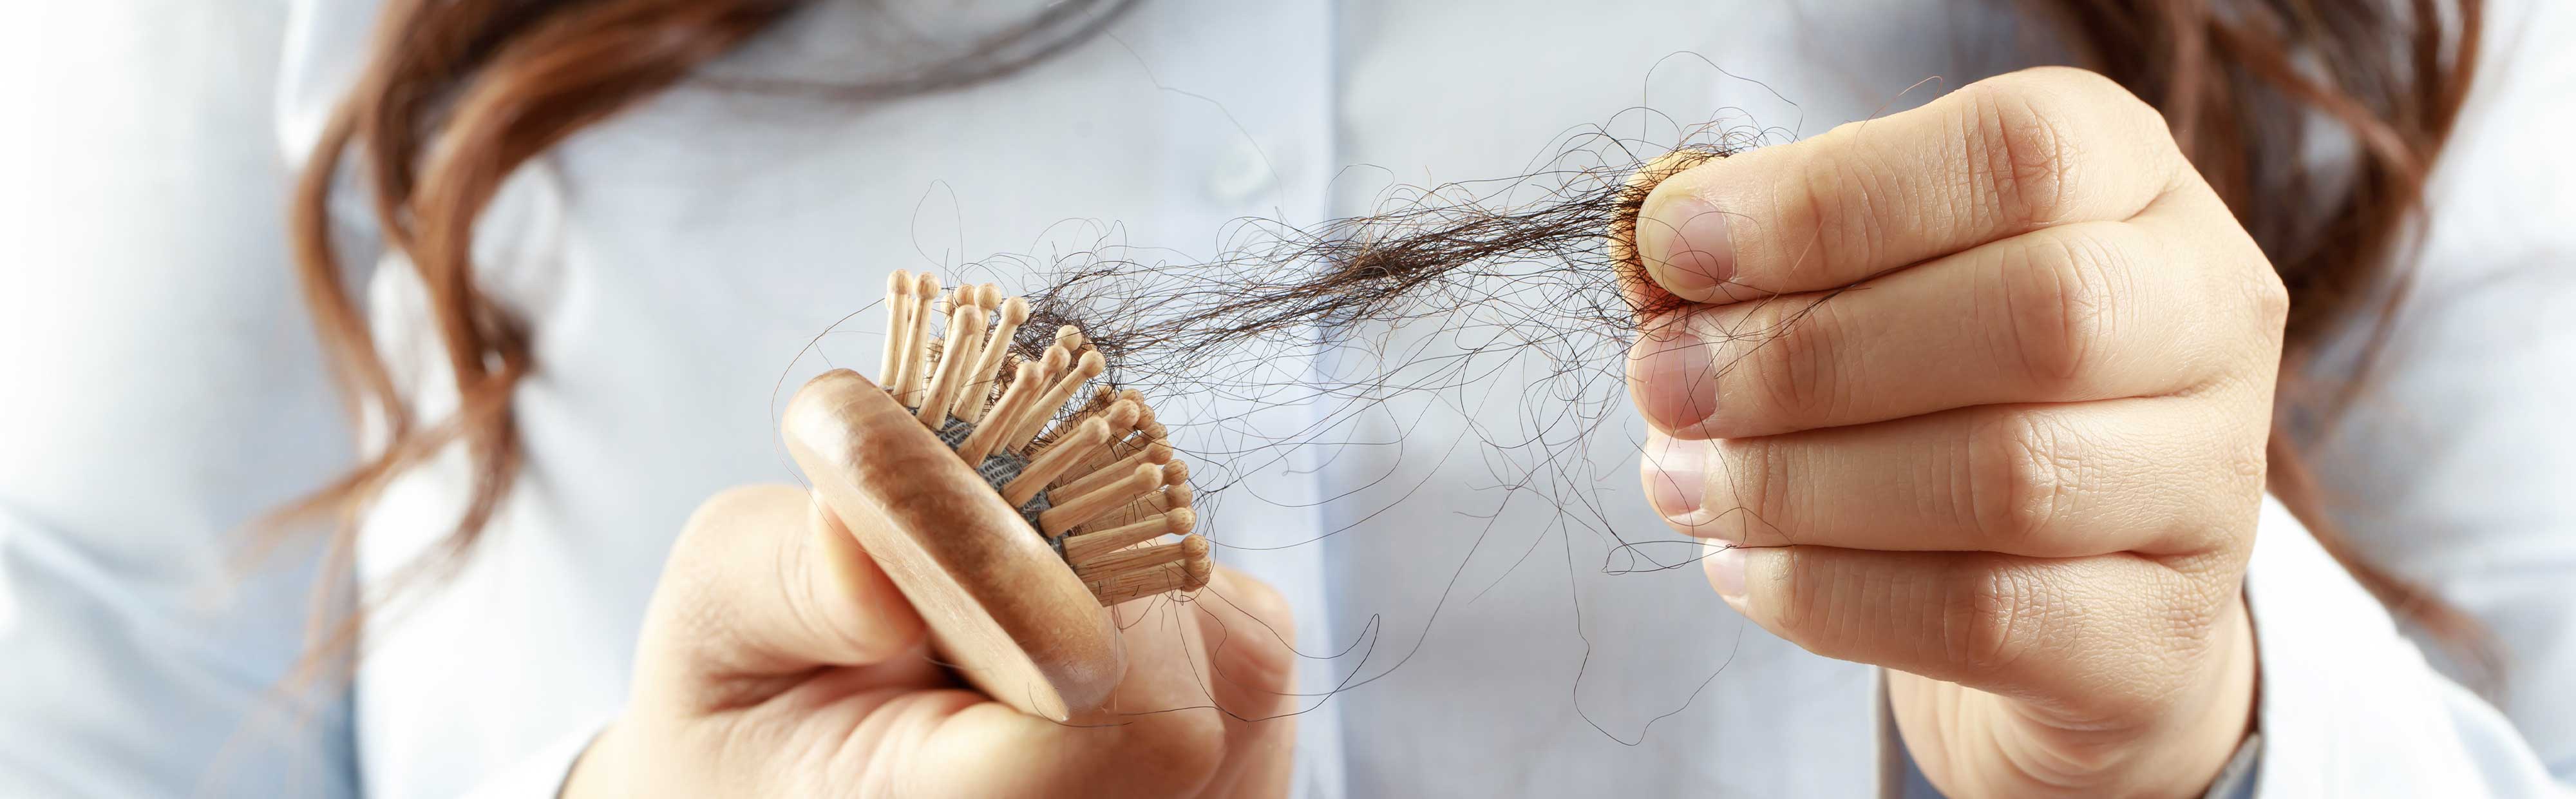 Does Biotin Help With Hair Growth or Loss? A Dermatologist Answers